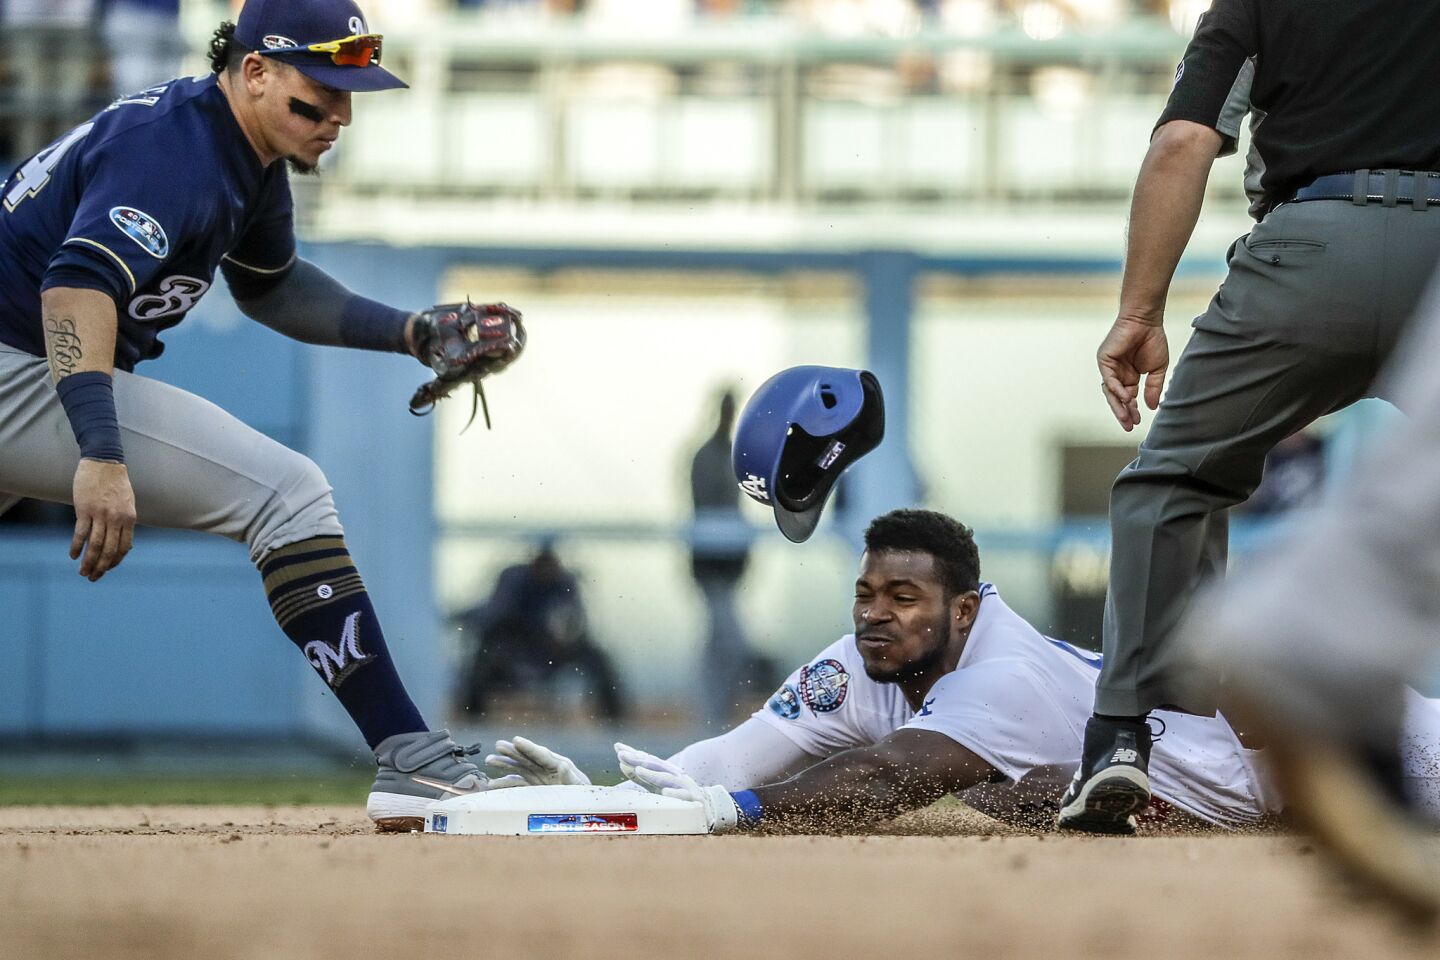 Dodgers Yasiel Puig slides safely into second base with an eighth inning double as Brewers second baseman Hernan Perez is late with the tag.